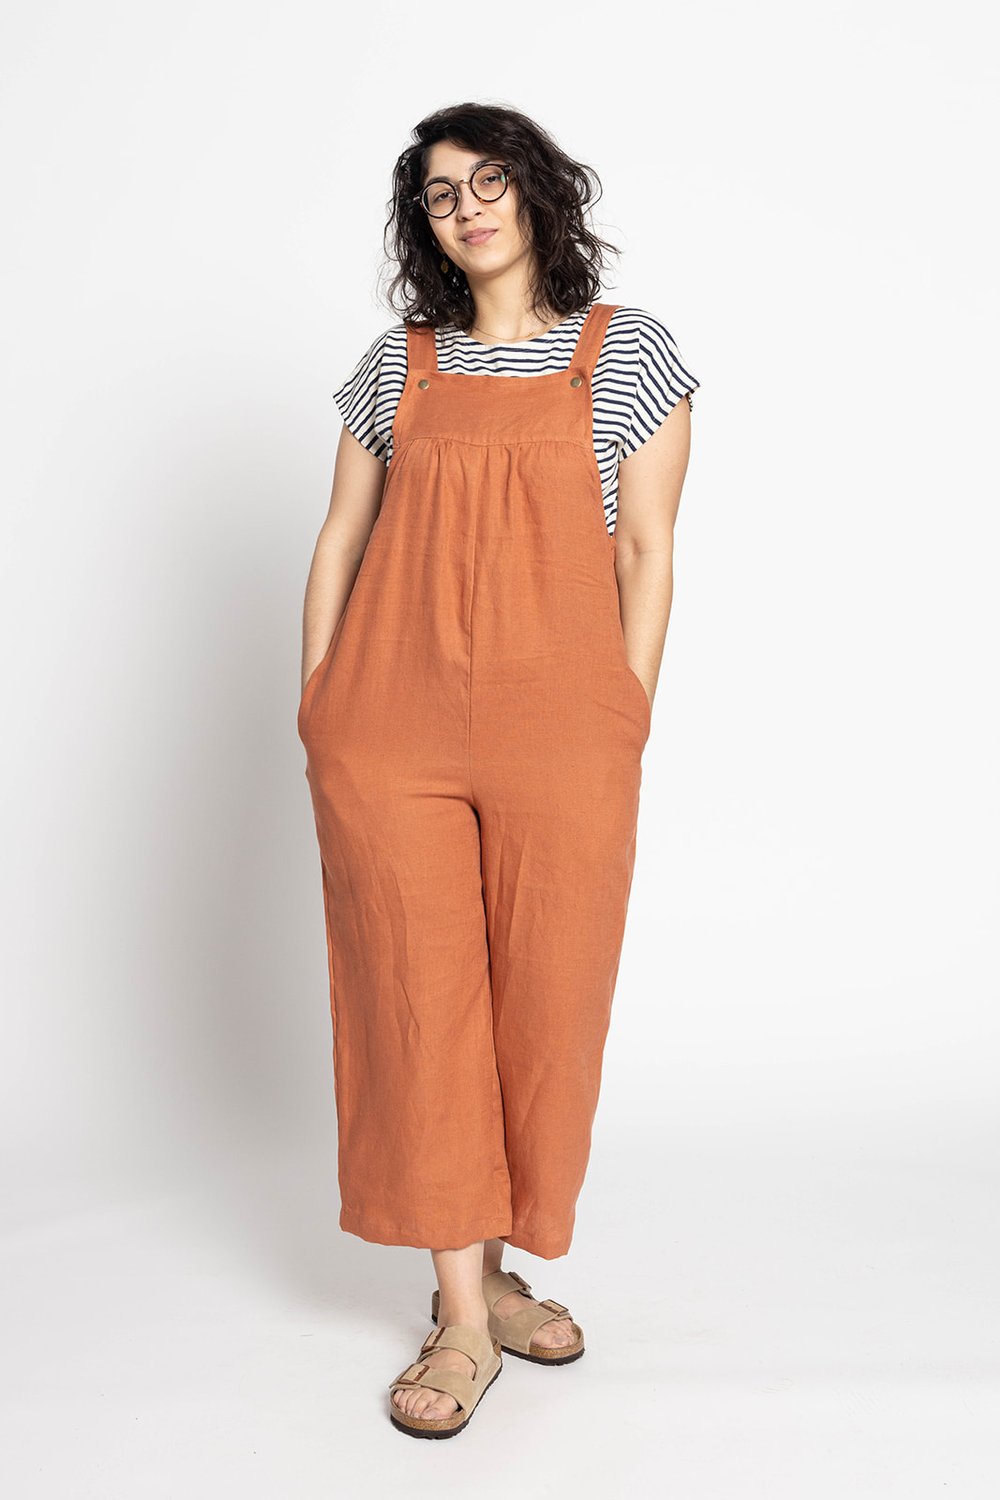 Sophie is wearing M overalls and a S top. Her measurements are: Height 5&#39;8&quot; | Bust 36&quot; | Waist 29&quot; | Hip 43.5&quot;